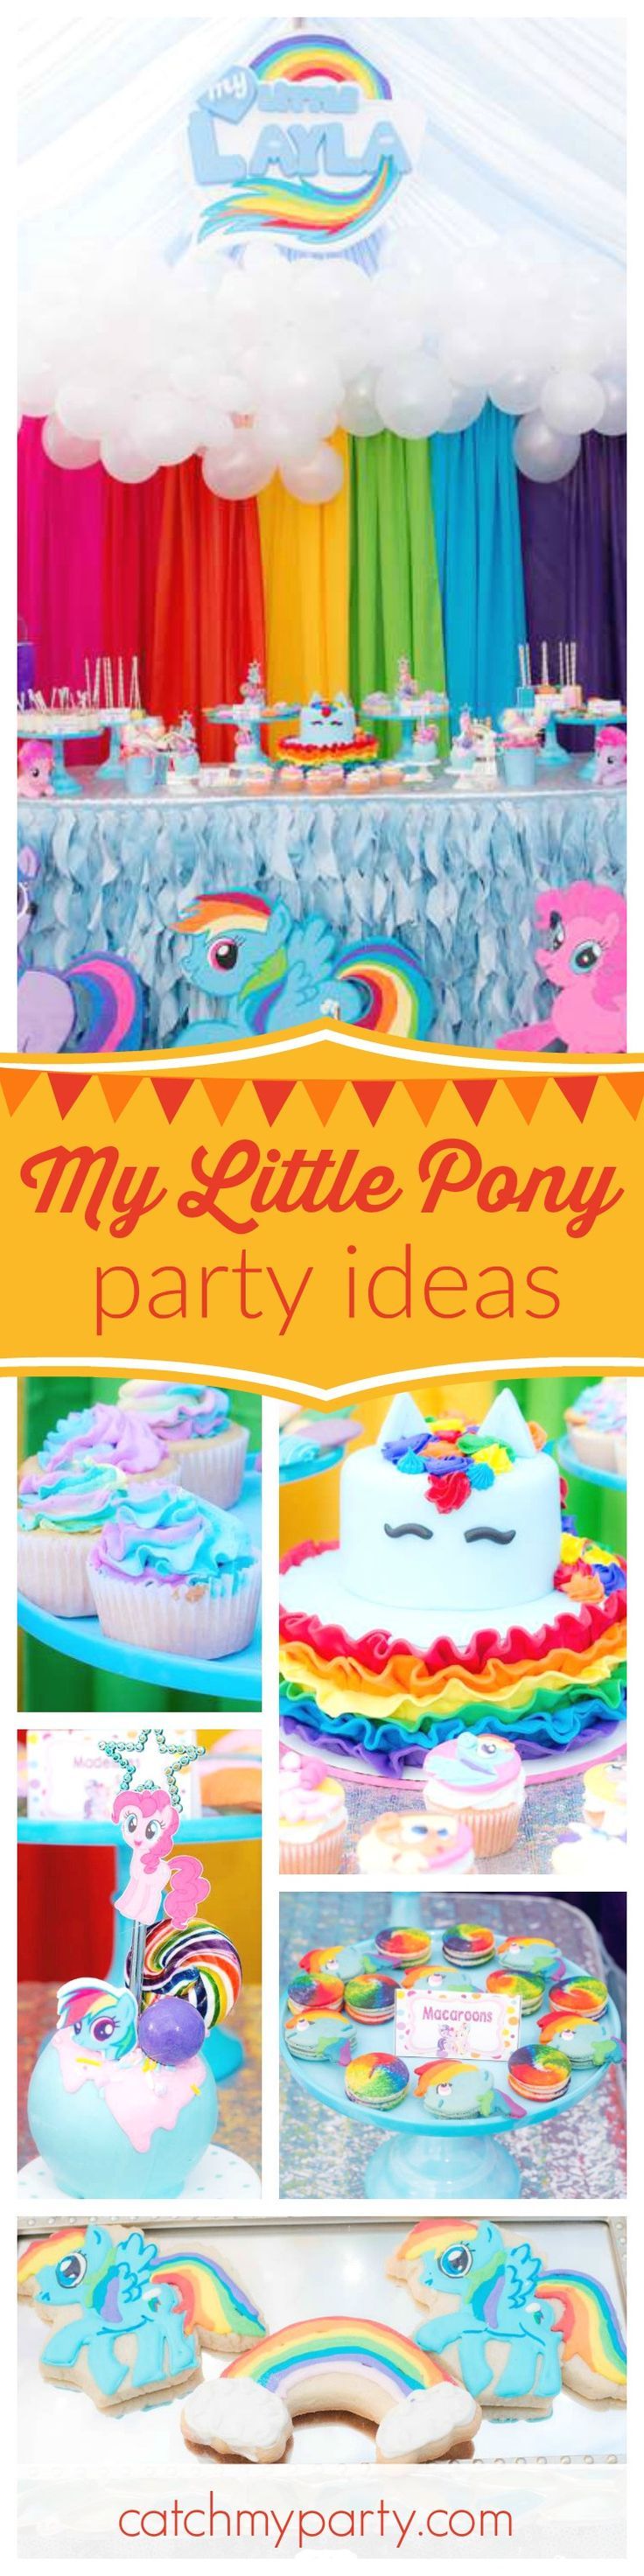 Don’t miss this colorful My Little Pony birthday party! The Rainbow Dash birthda… Wallpaper